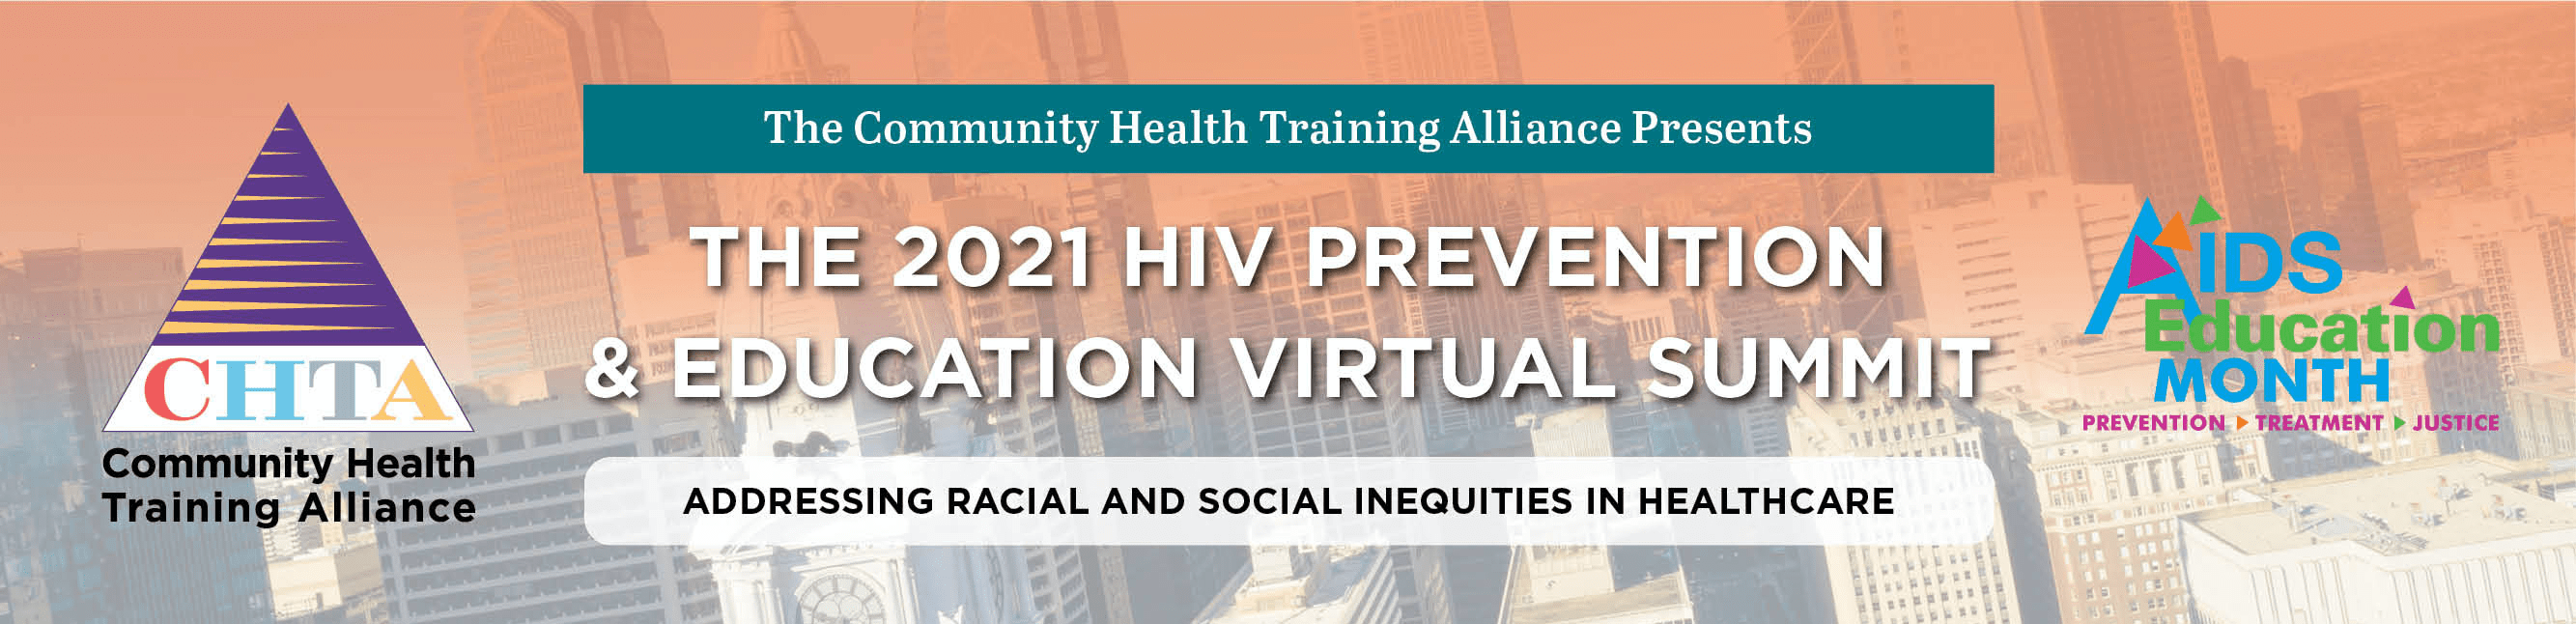 2021 HIV Prevention and Education Virtual Summit: Racial and Social Inequities in Healthcare